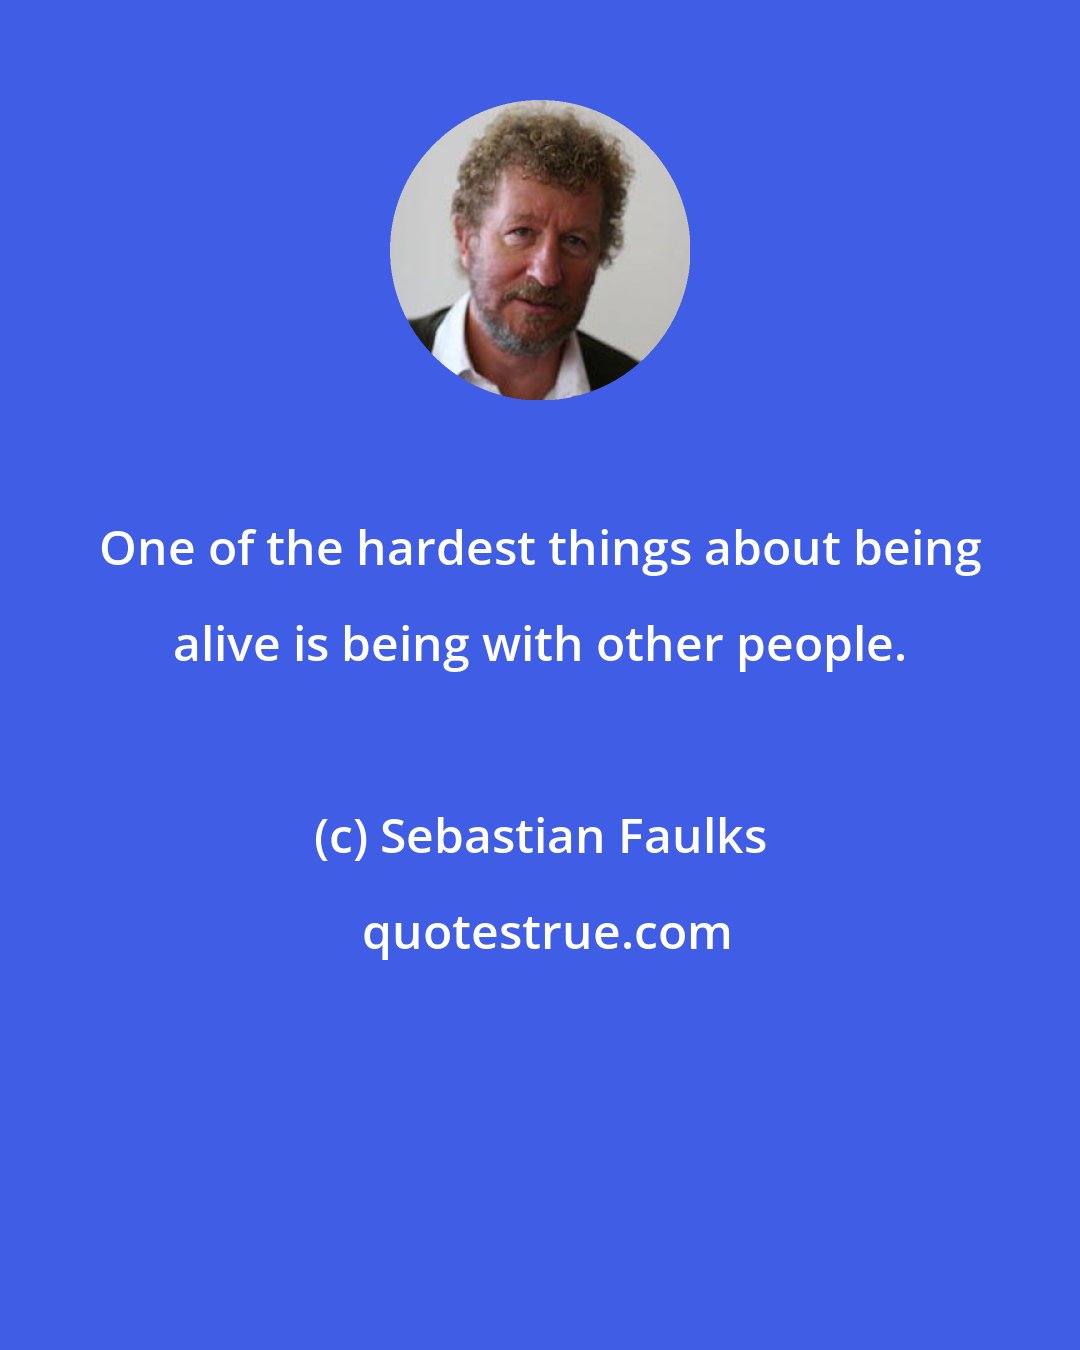 Sebastian Faulks: One of the hardest things about being alive is being with other people.